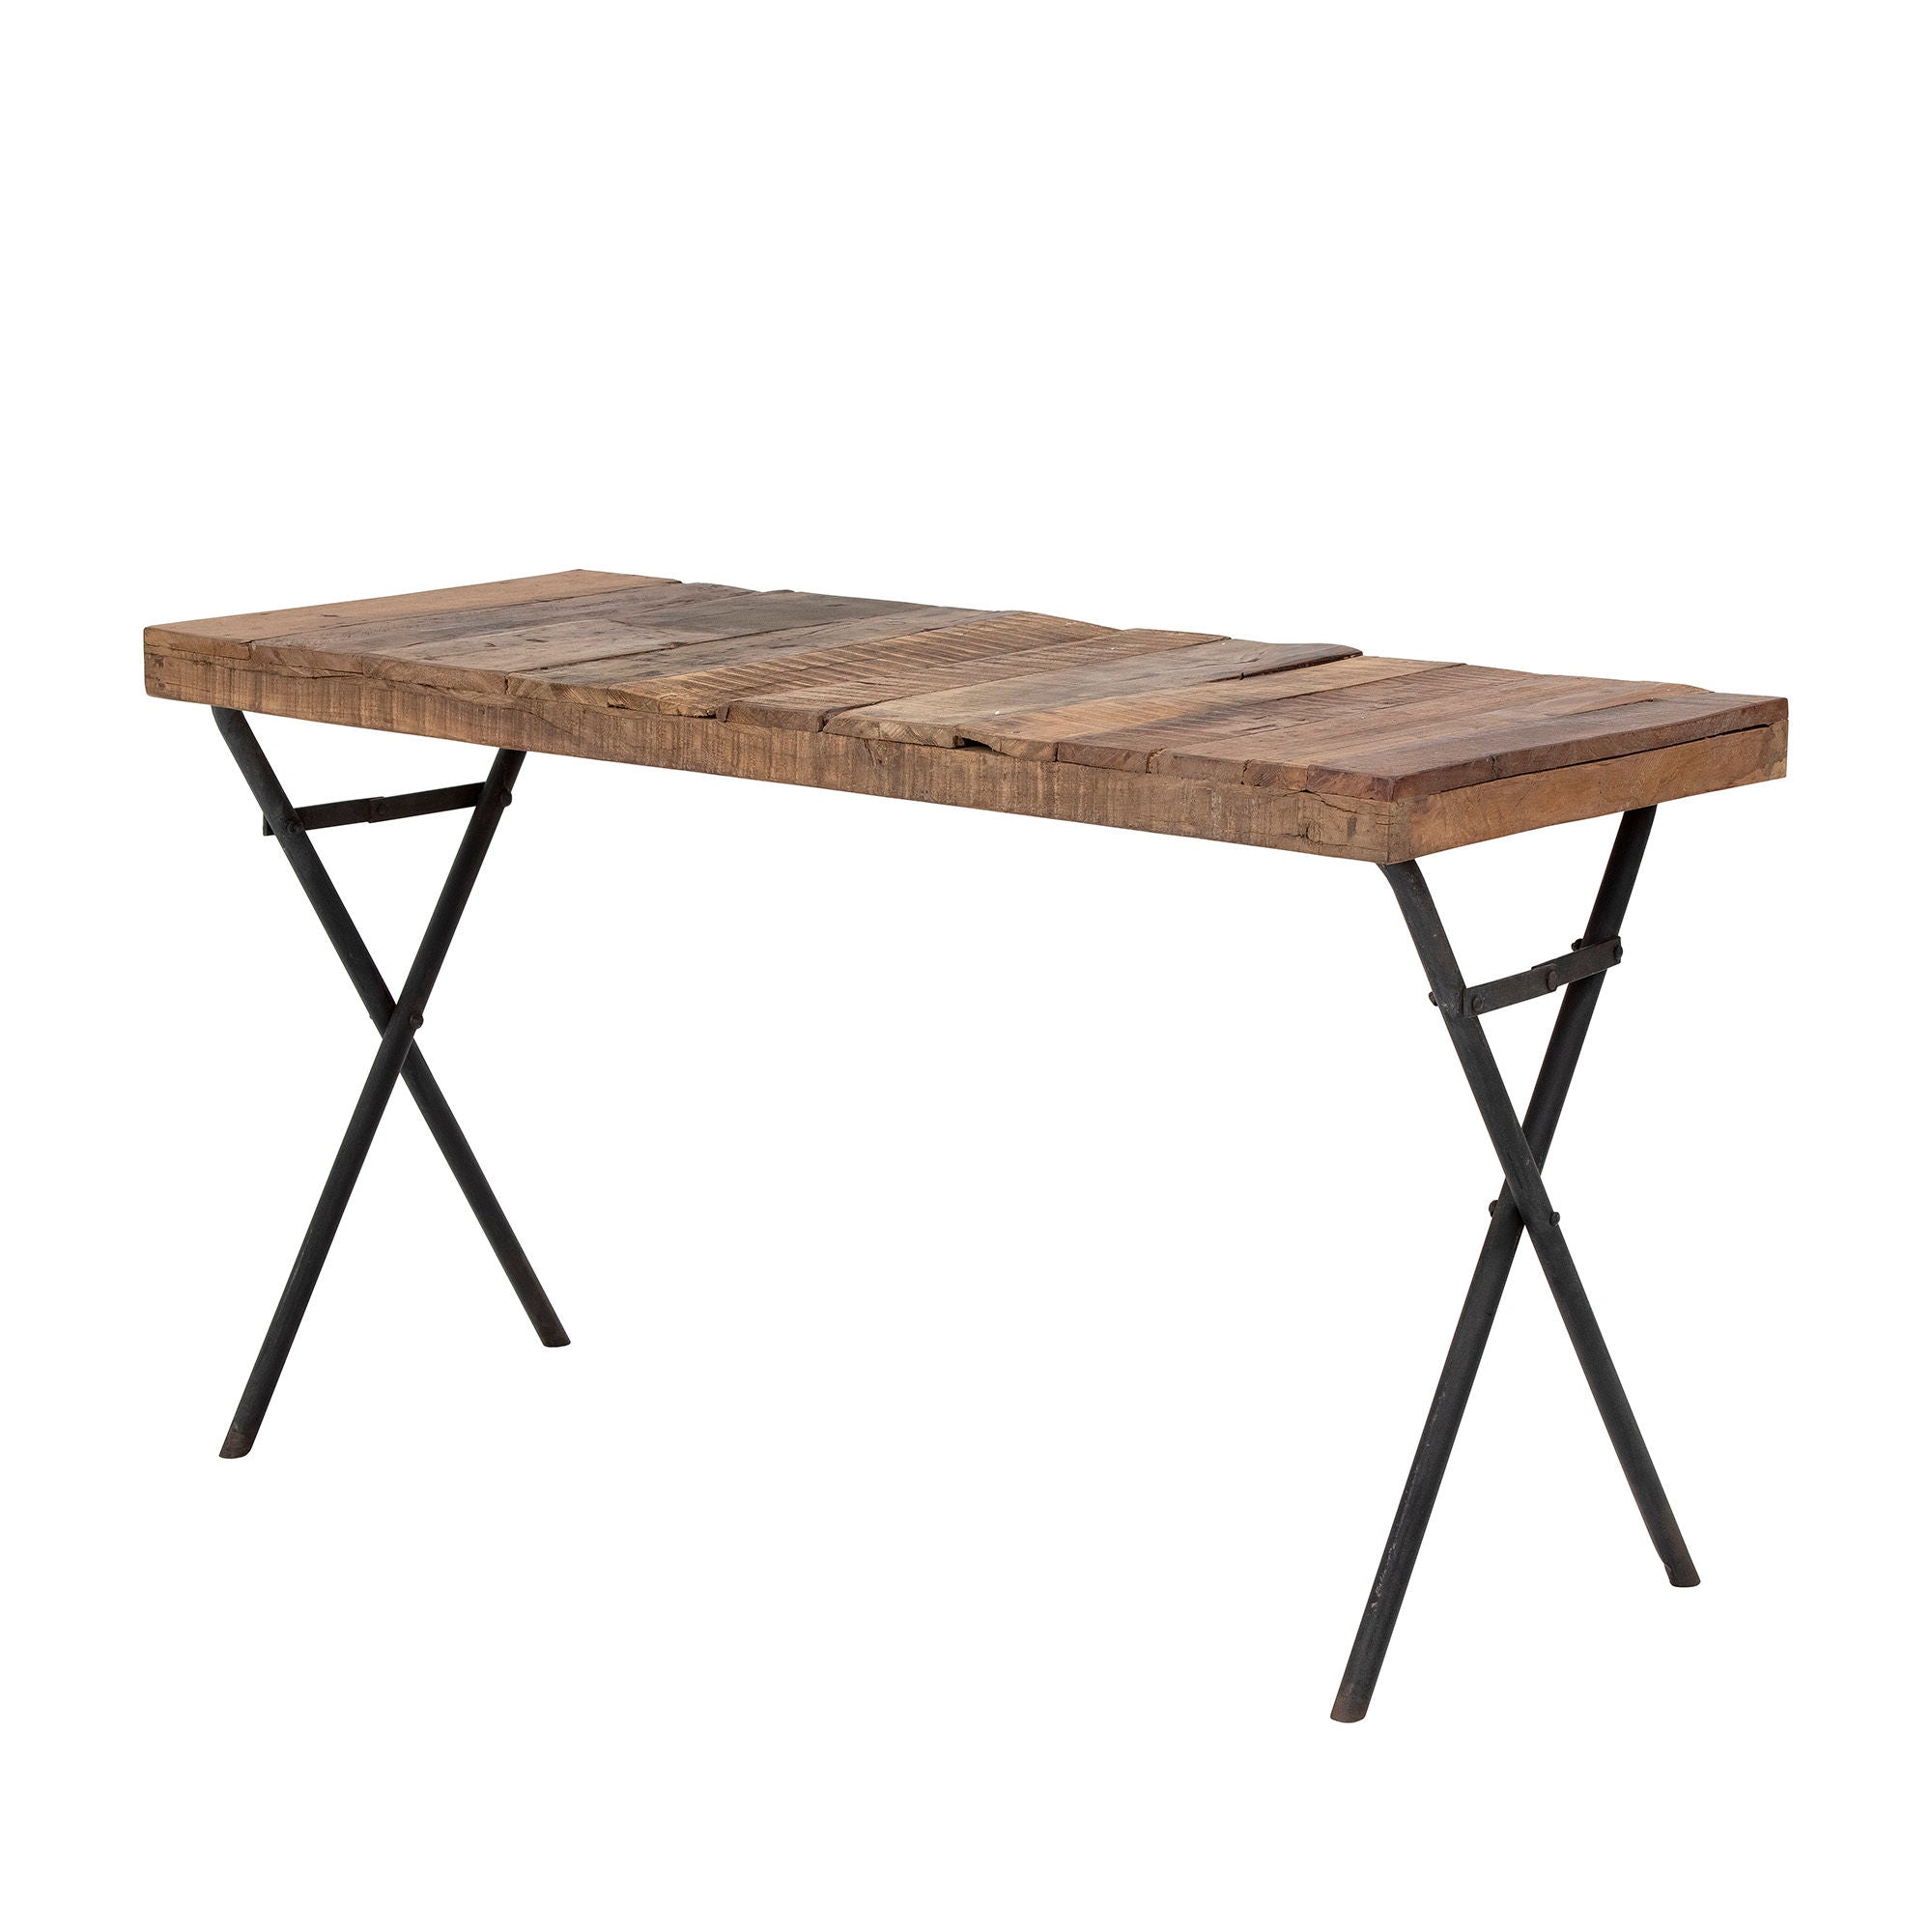 Creative Collection Mauie Dining Table, Nature, Reclaimed Wood